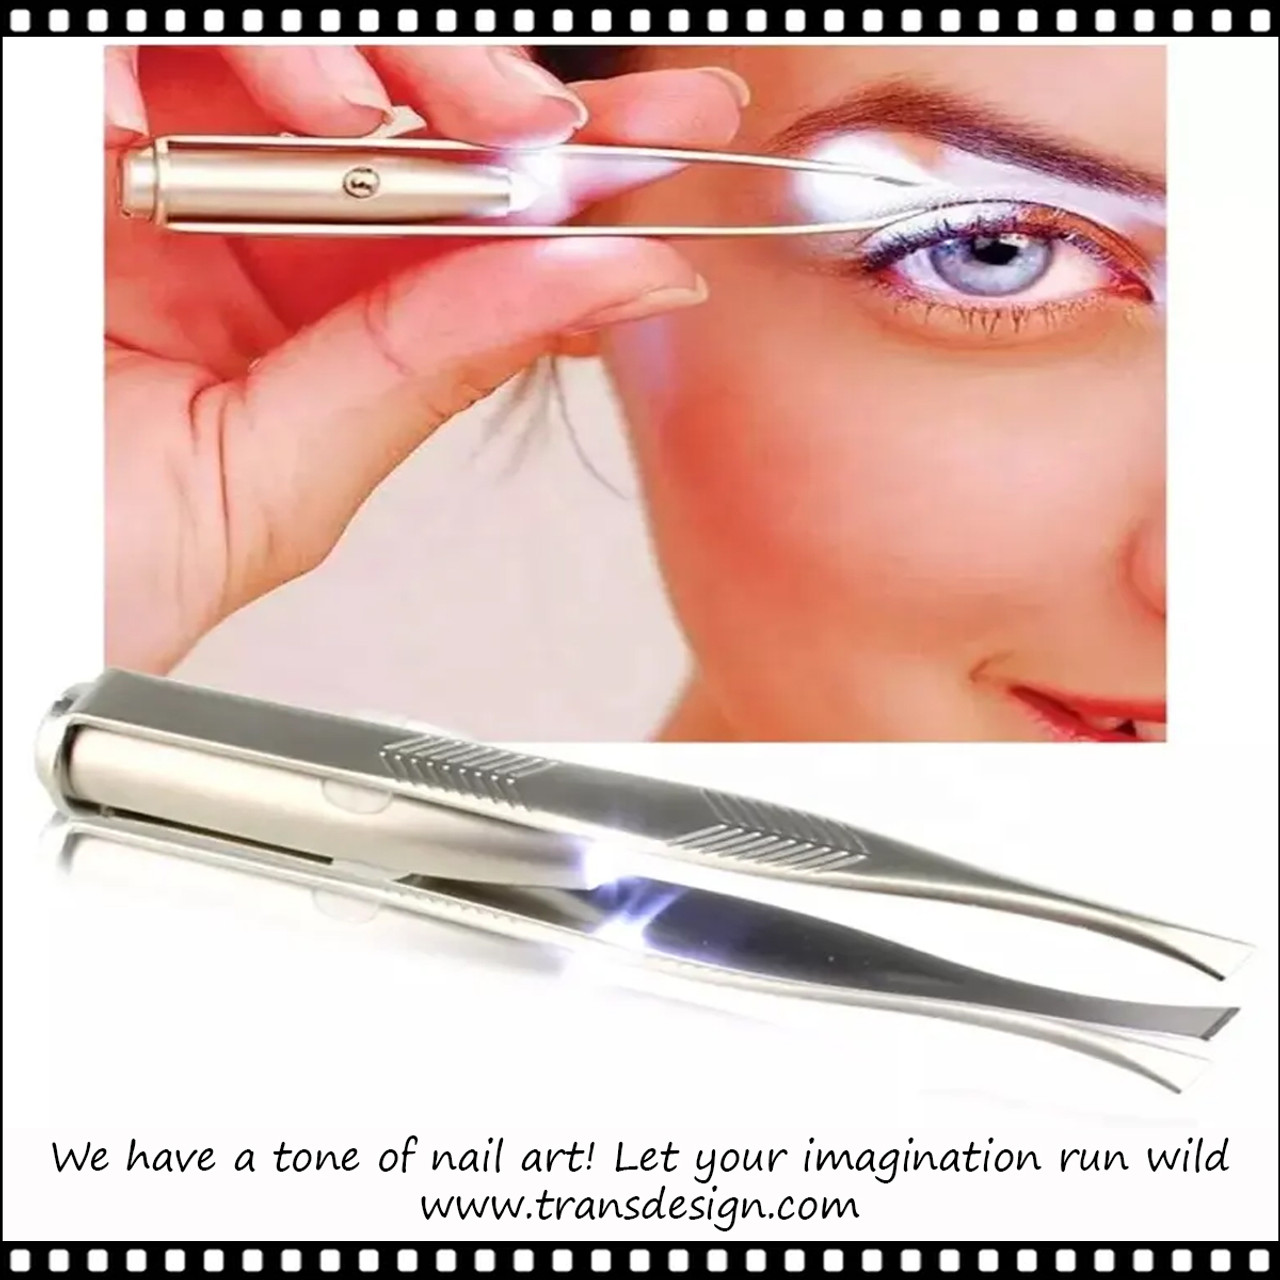 Lighted Tweezers for Precision Hair Removal Men Women, Makeup Eyelash  Eyebrow Hair Removal Tweezers Illuminating, Stainless Steel with LED Light  Eyebrow Clip - Black 